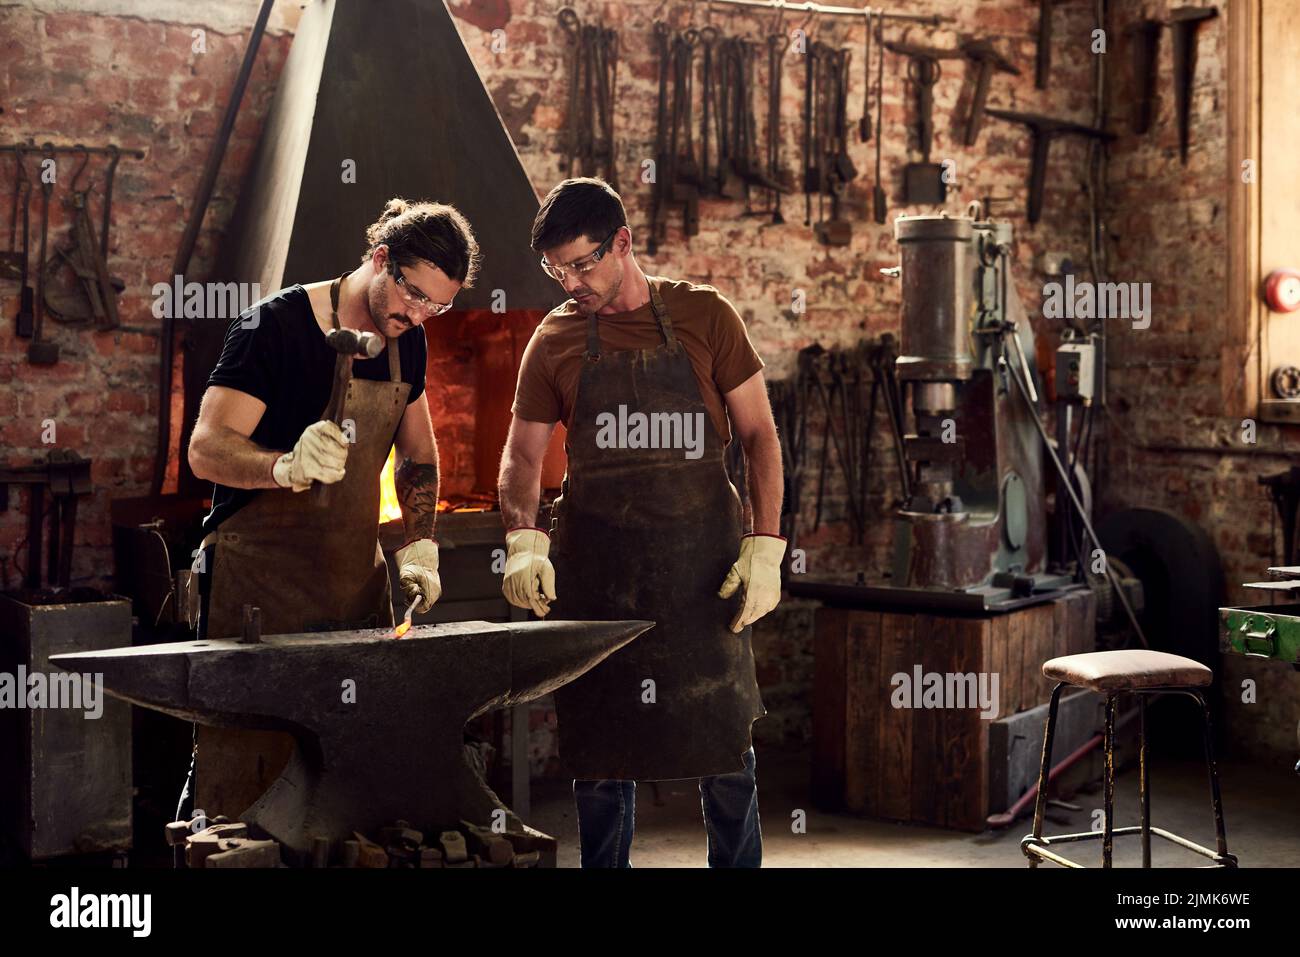 Were the heavy metal guys. two handsome young metal workers working together inside a welding workshop. Stock Photo